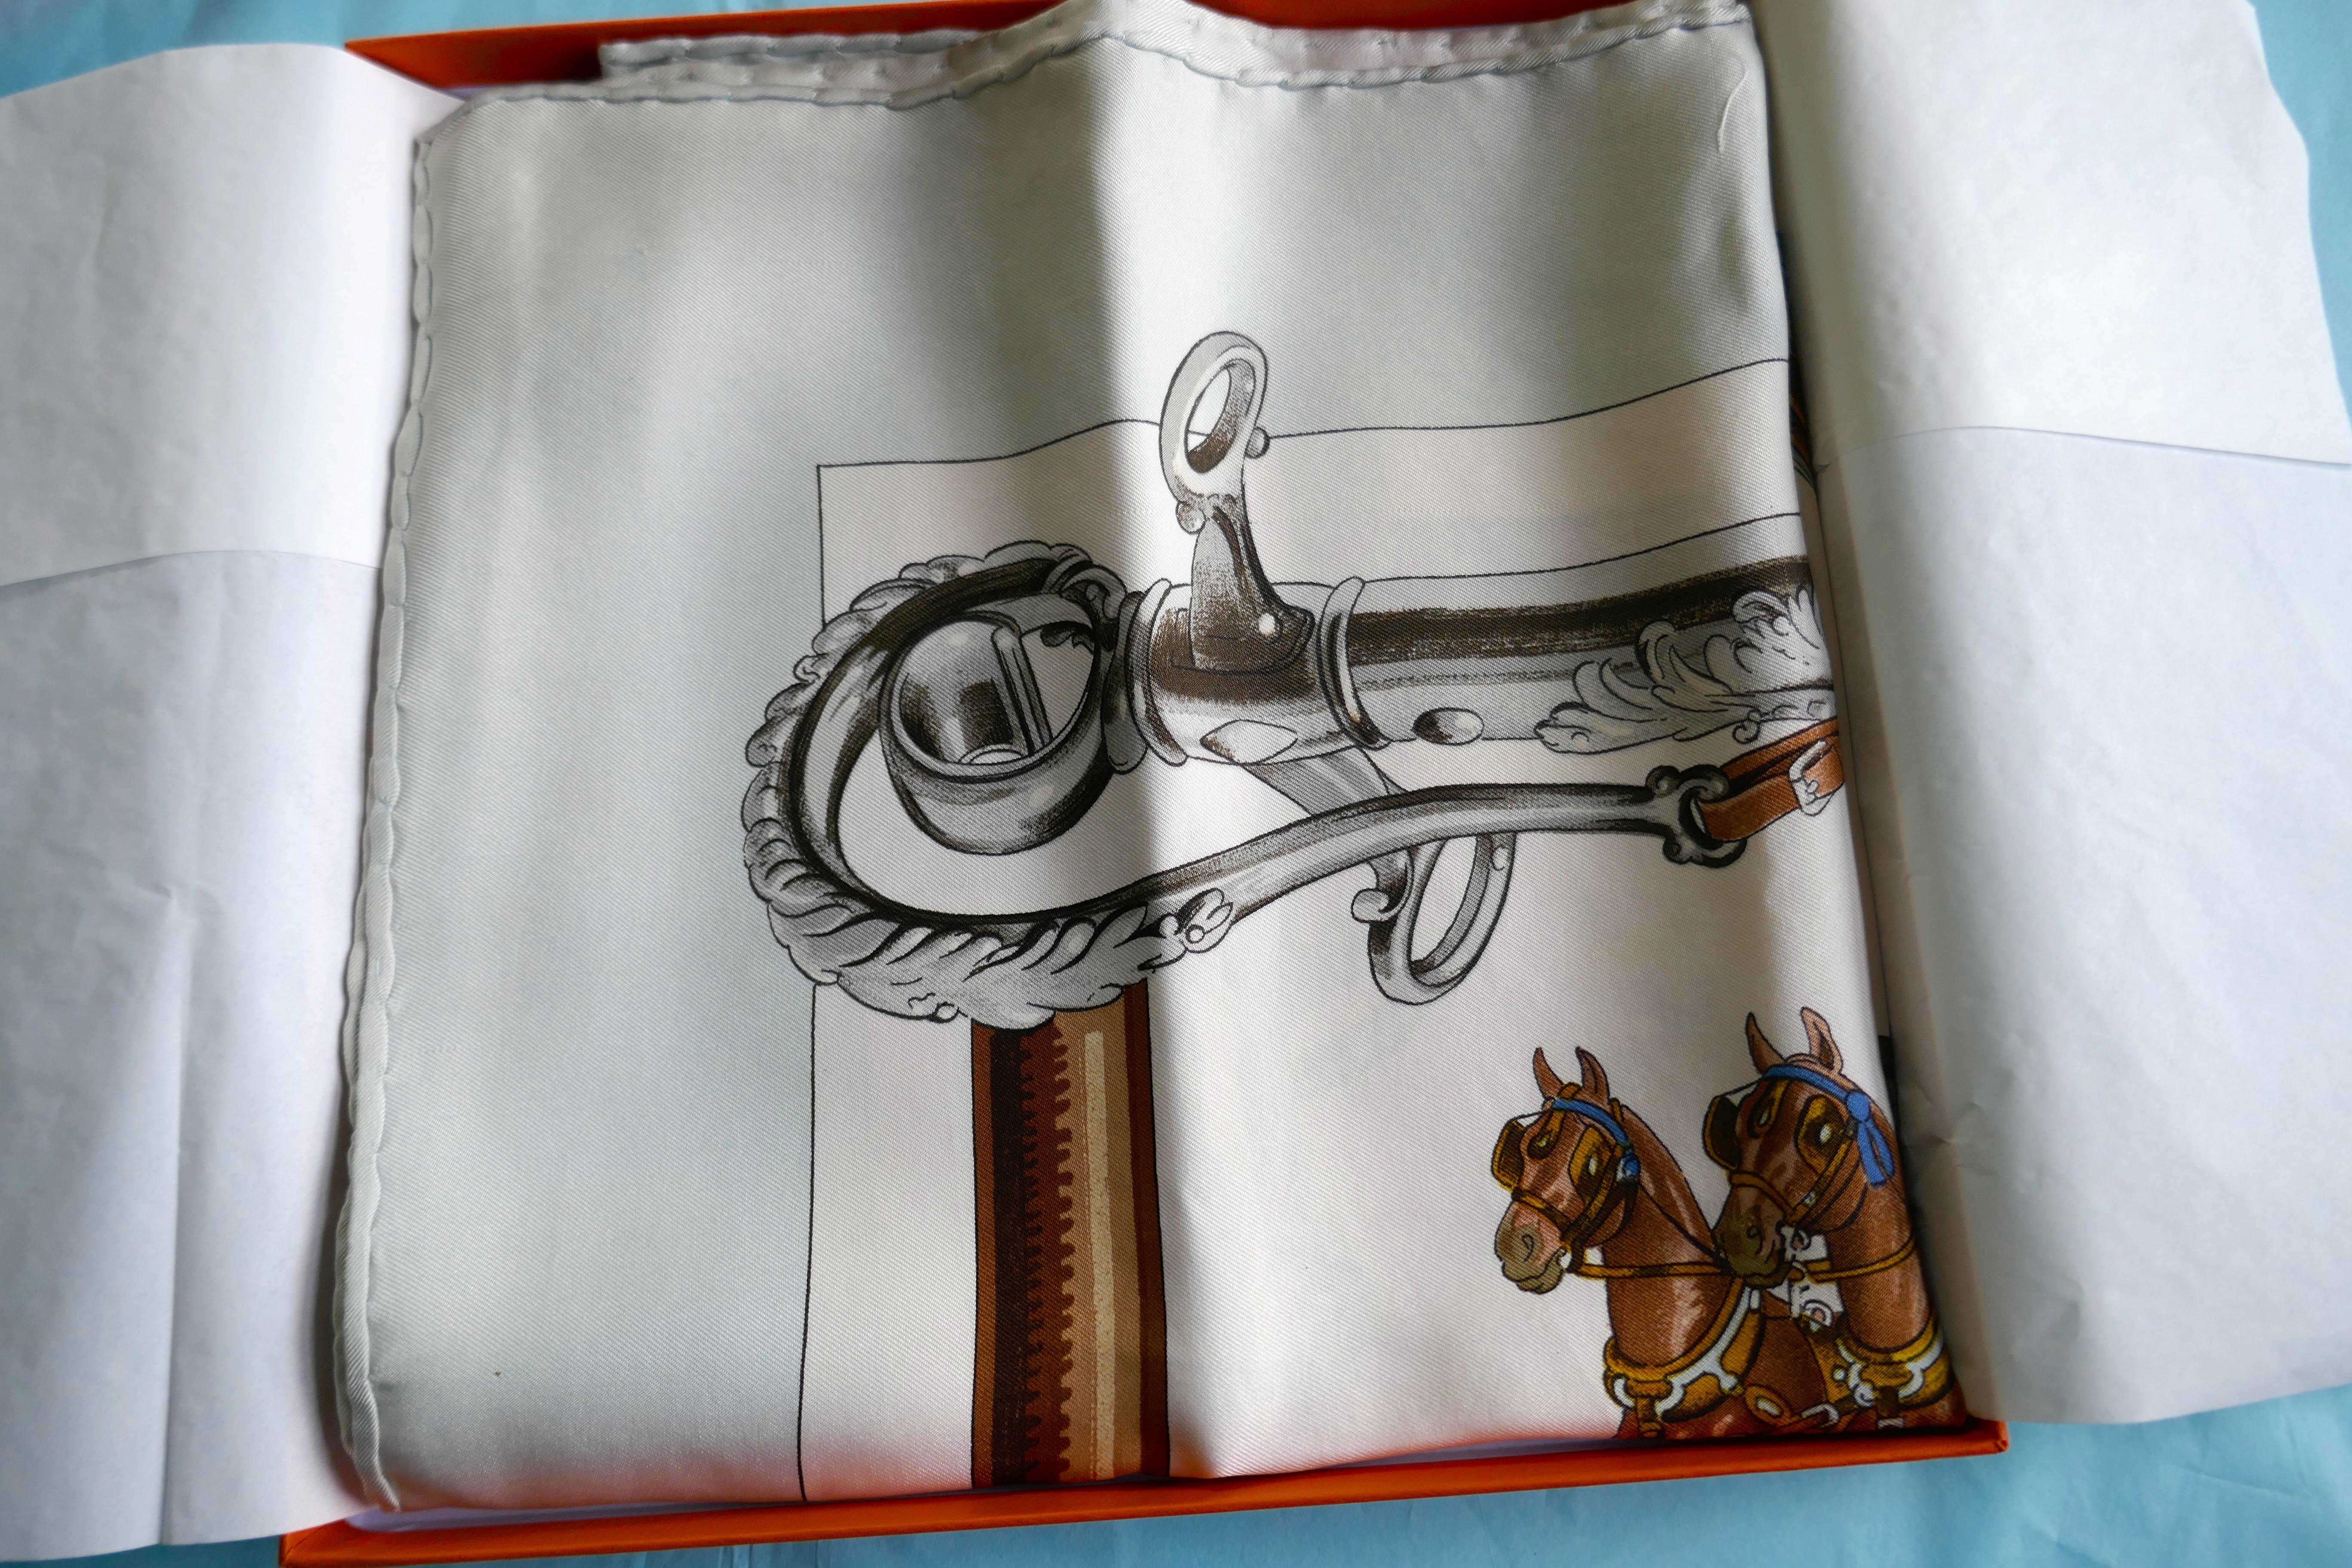 Hermes Vintage Silk Scarf “EQUIPAGES” by Philippe Ledoux,

Beautiful condition has been kept folded since new “EQUIPAGES” by Philippe Ledoux Horse Carriage Driving
The highest quality silk which makes the scarf extra durable. 
Duck Egg Blue Border